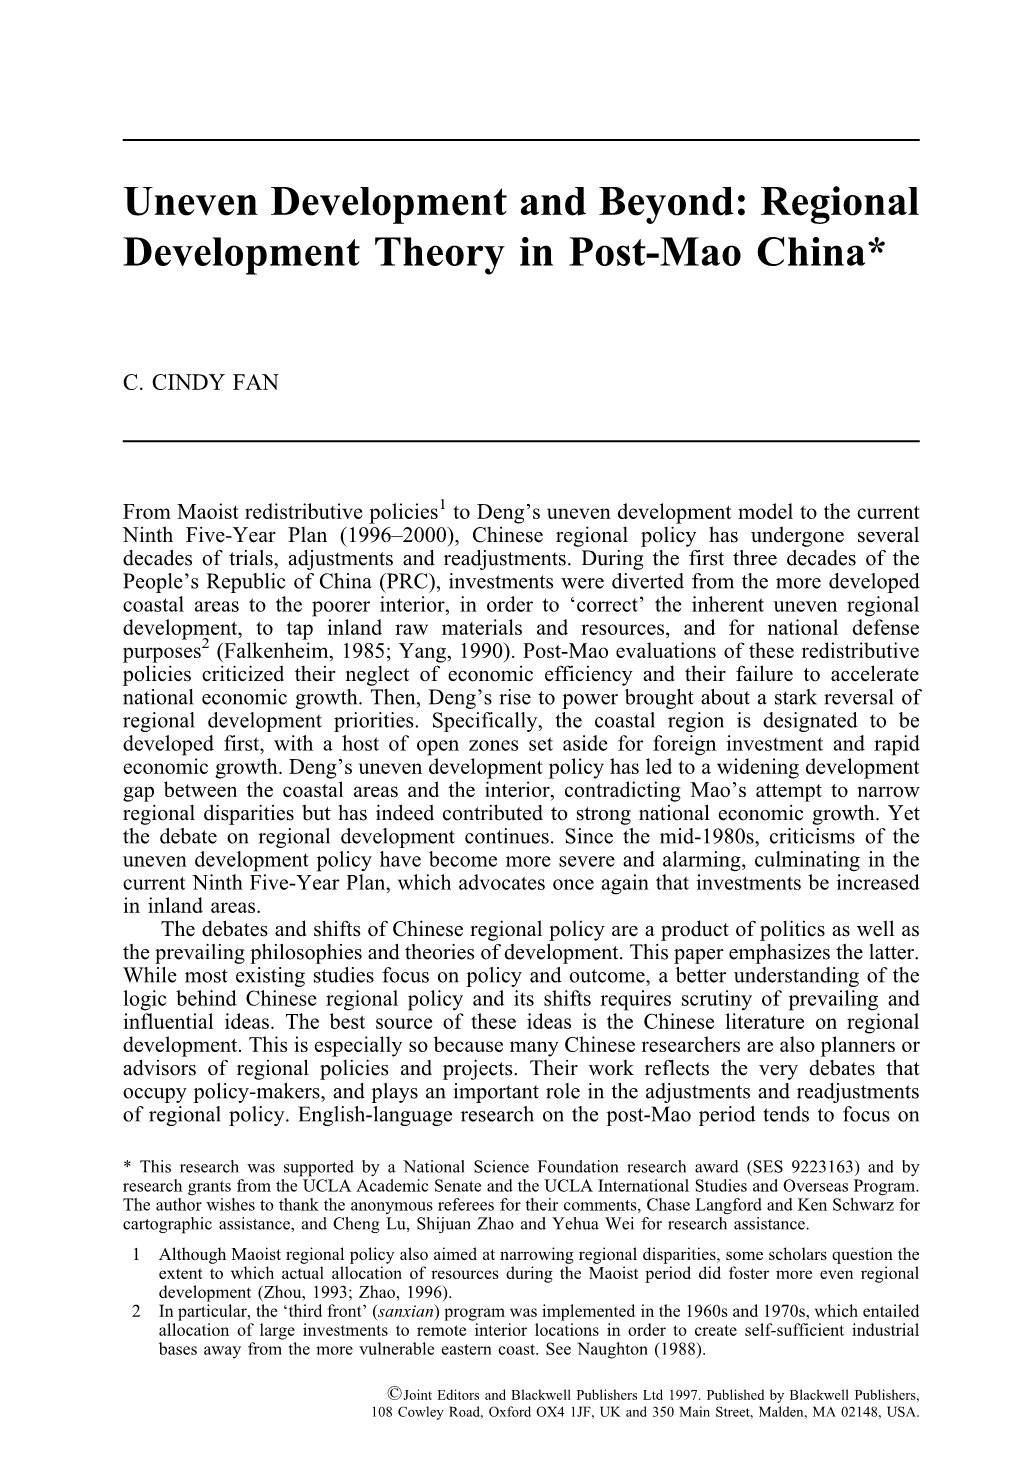 Uneven Development and Beyond: Regional Development Theory in Post-Mao China*